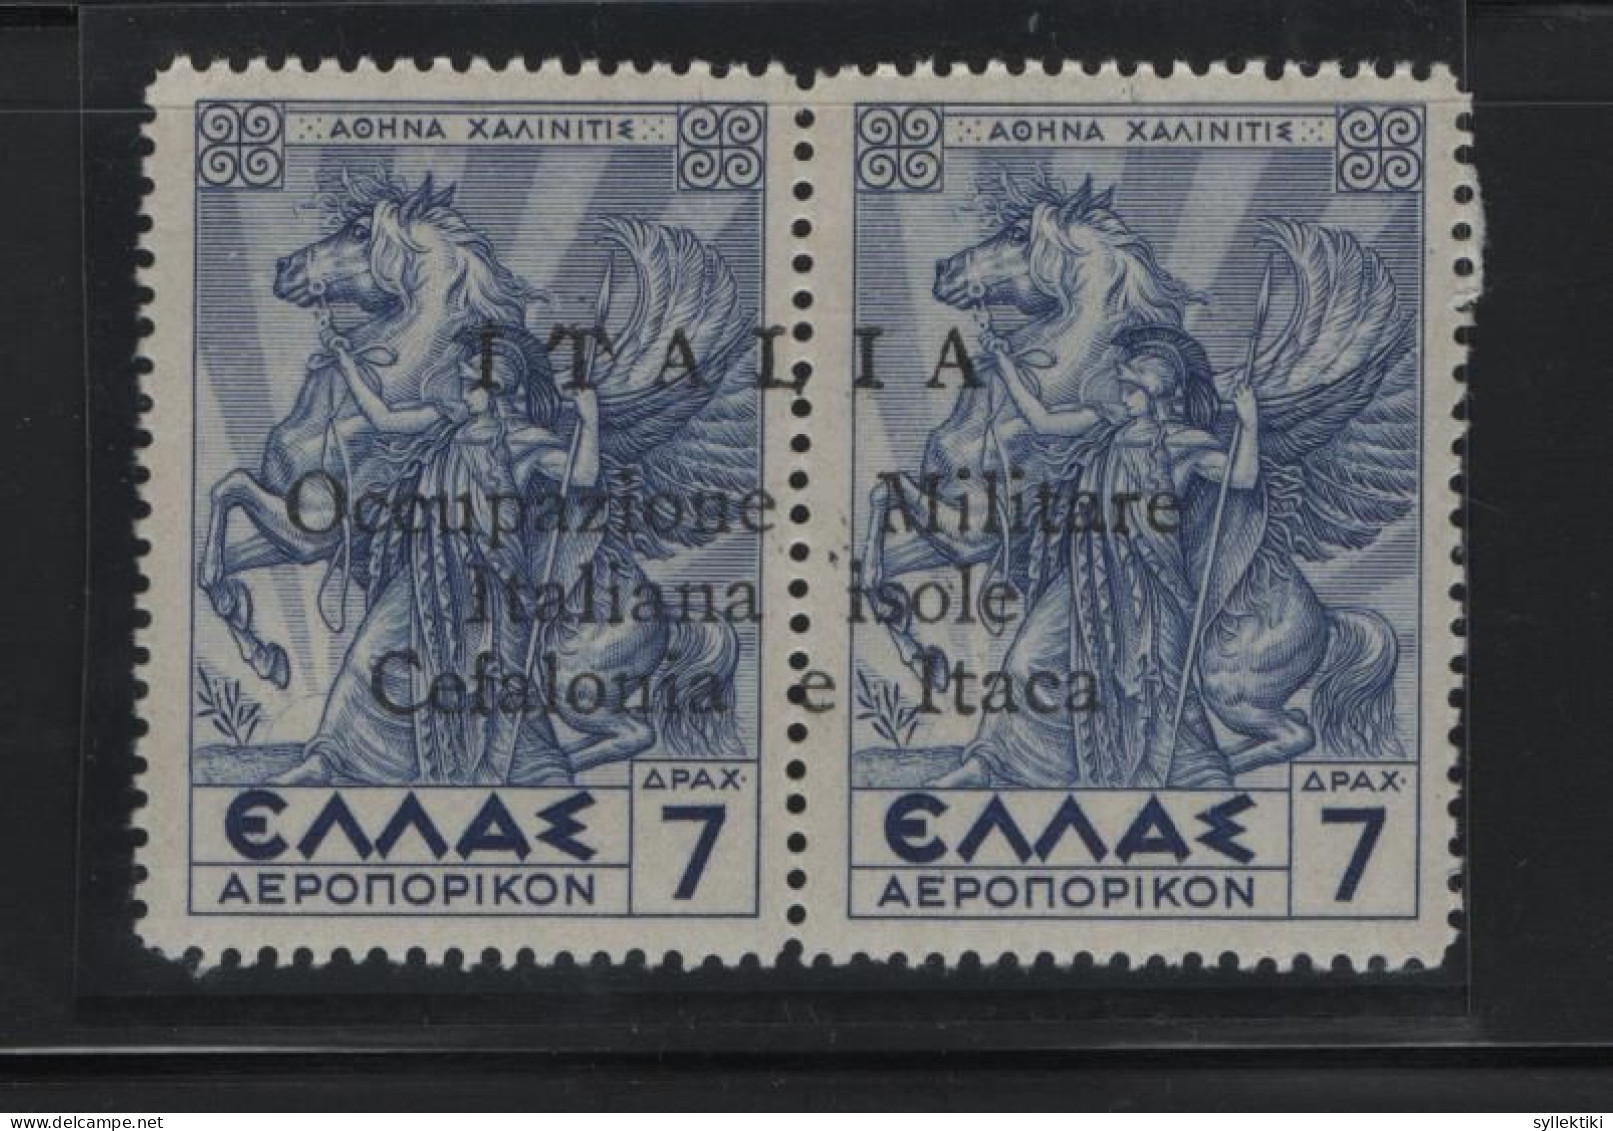 GREECE IONIAN ISLANDS 1941 7+7 DRACHMAS PAIR MNH STAMPS MYTHOLOGICAL ISSUE OVERPRINTED ITALIA Occupazione Militare Itali - Isole Ioniche